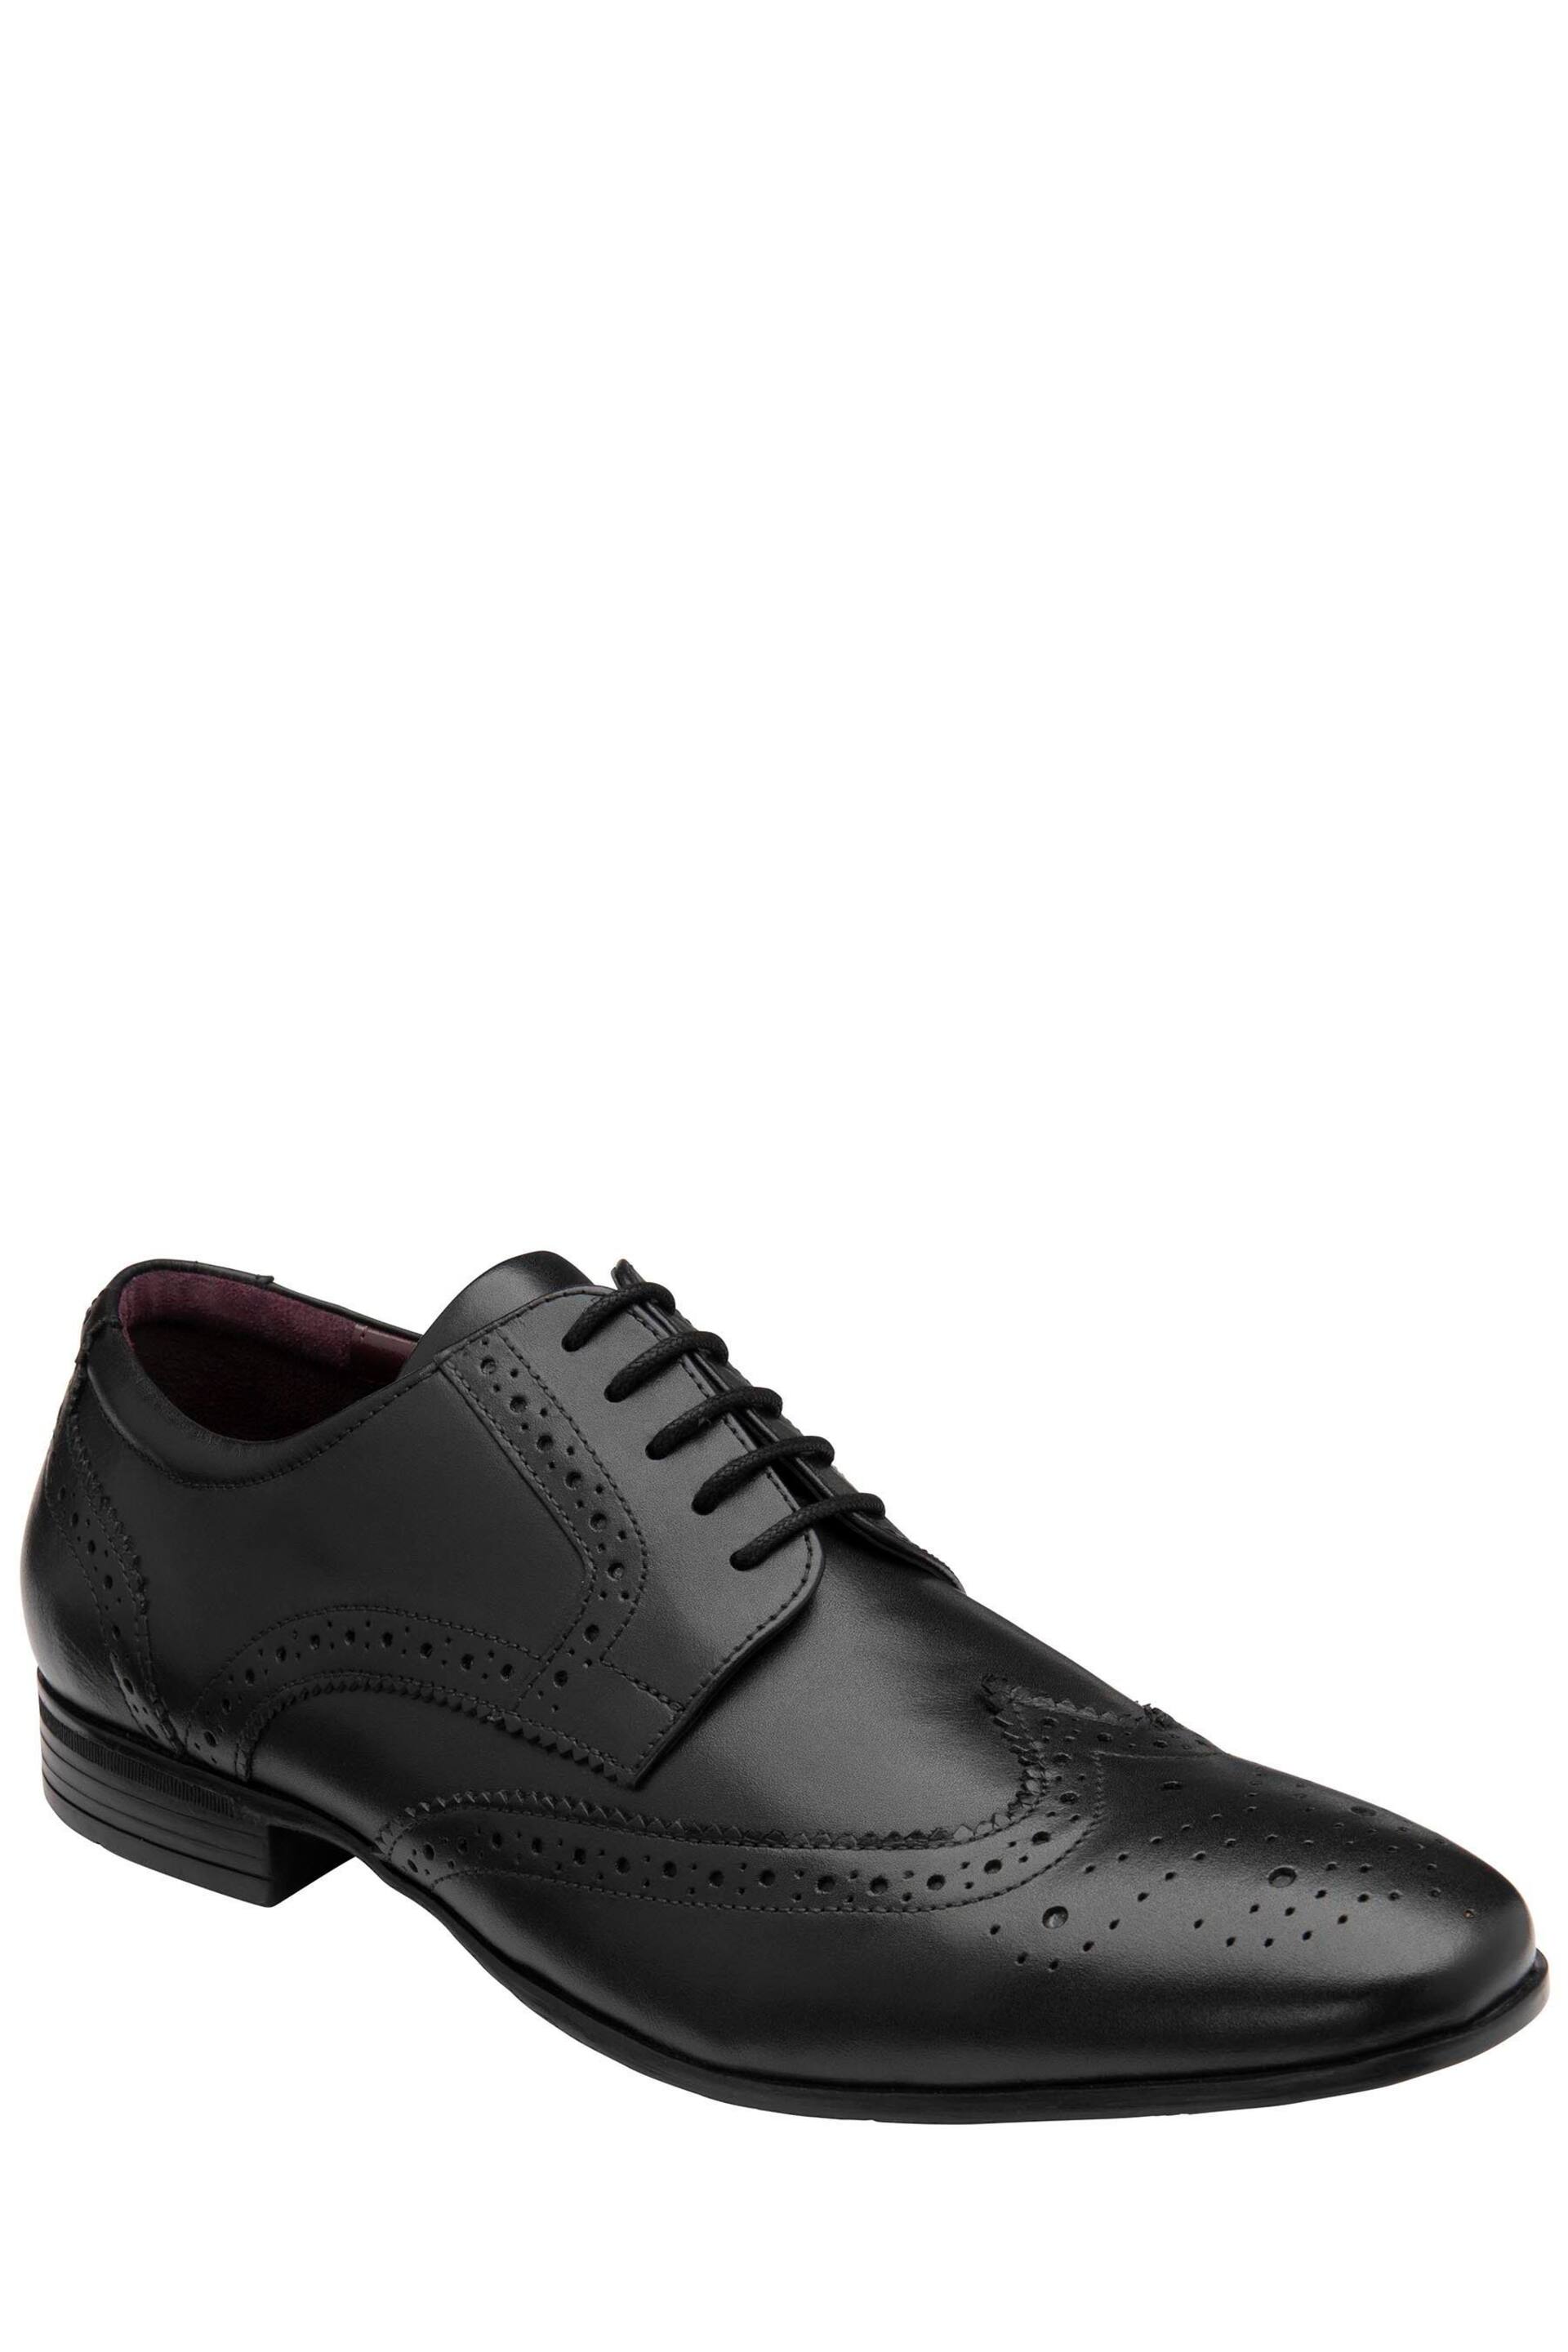 Lotus Jet Black Leather Lace-Up Brogues - Image 1 of 4